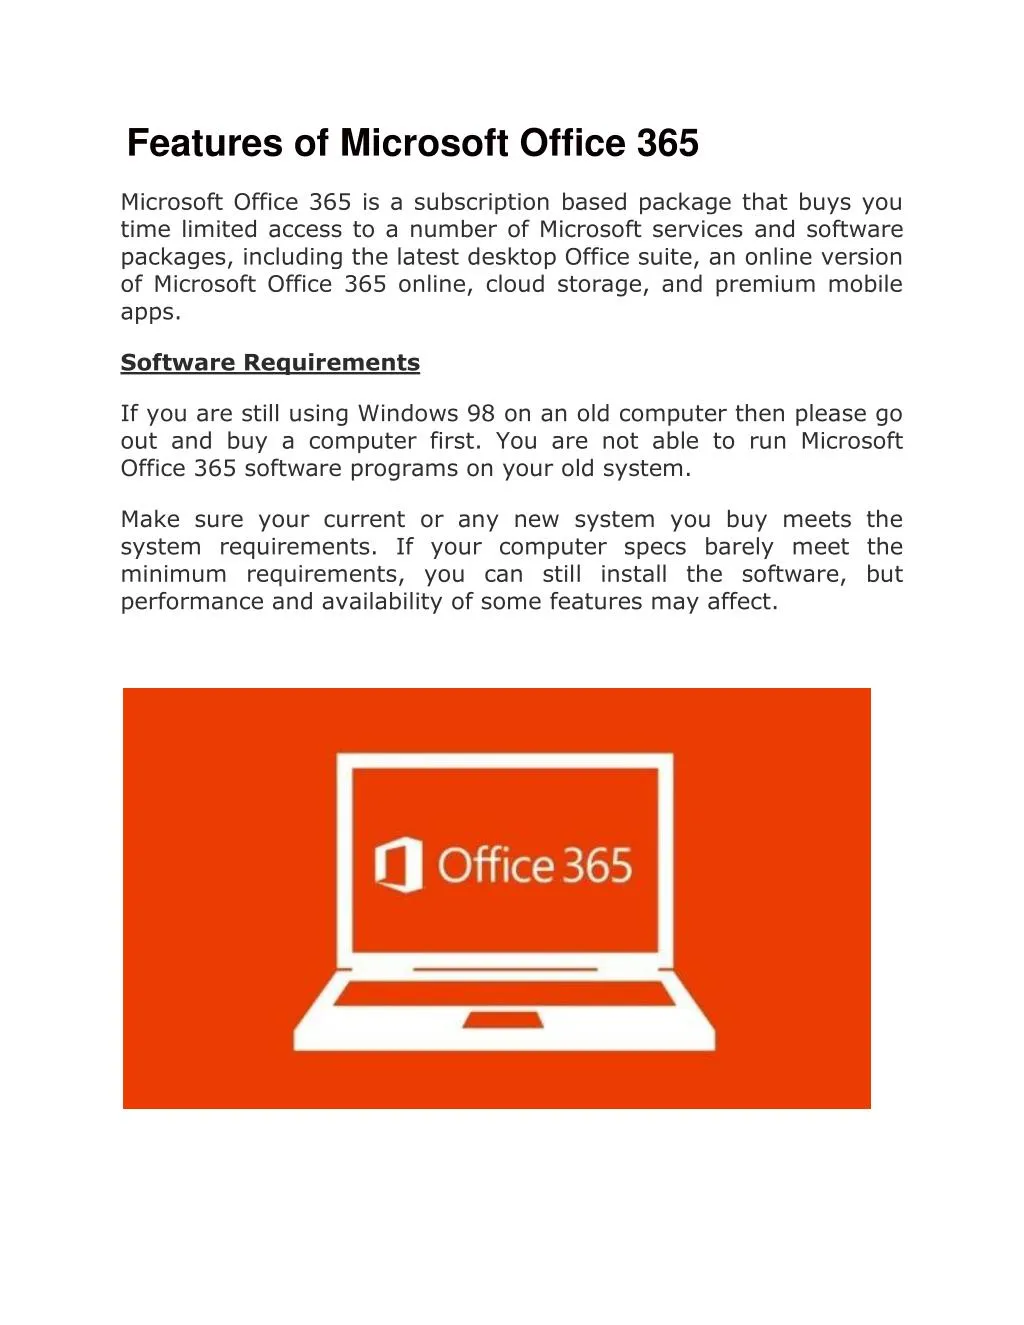 32 years in, Microsoft has decided to rebrand “Microsoft Office”